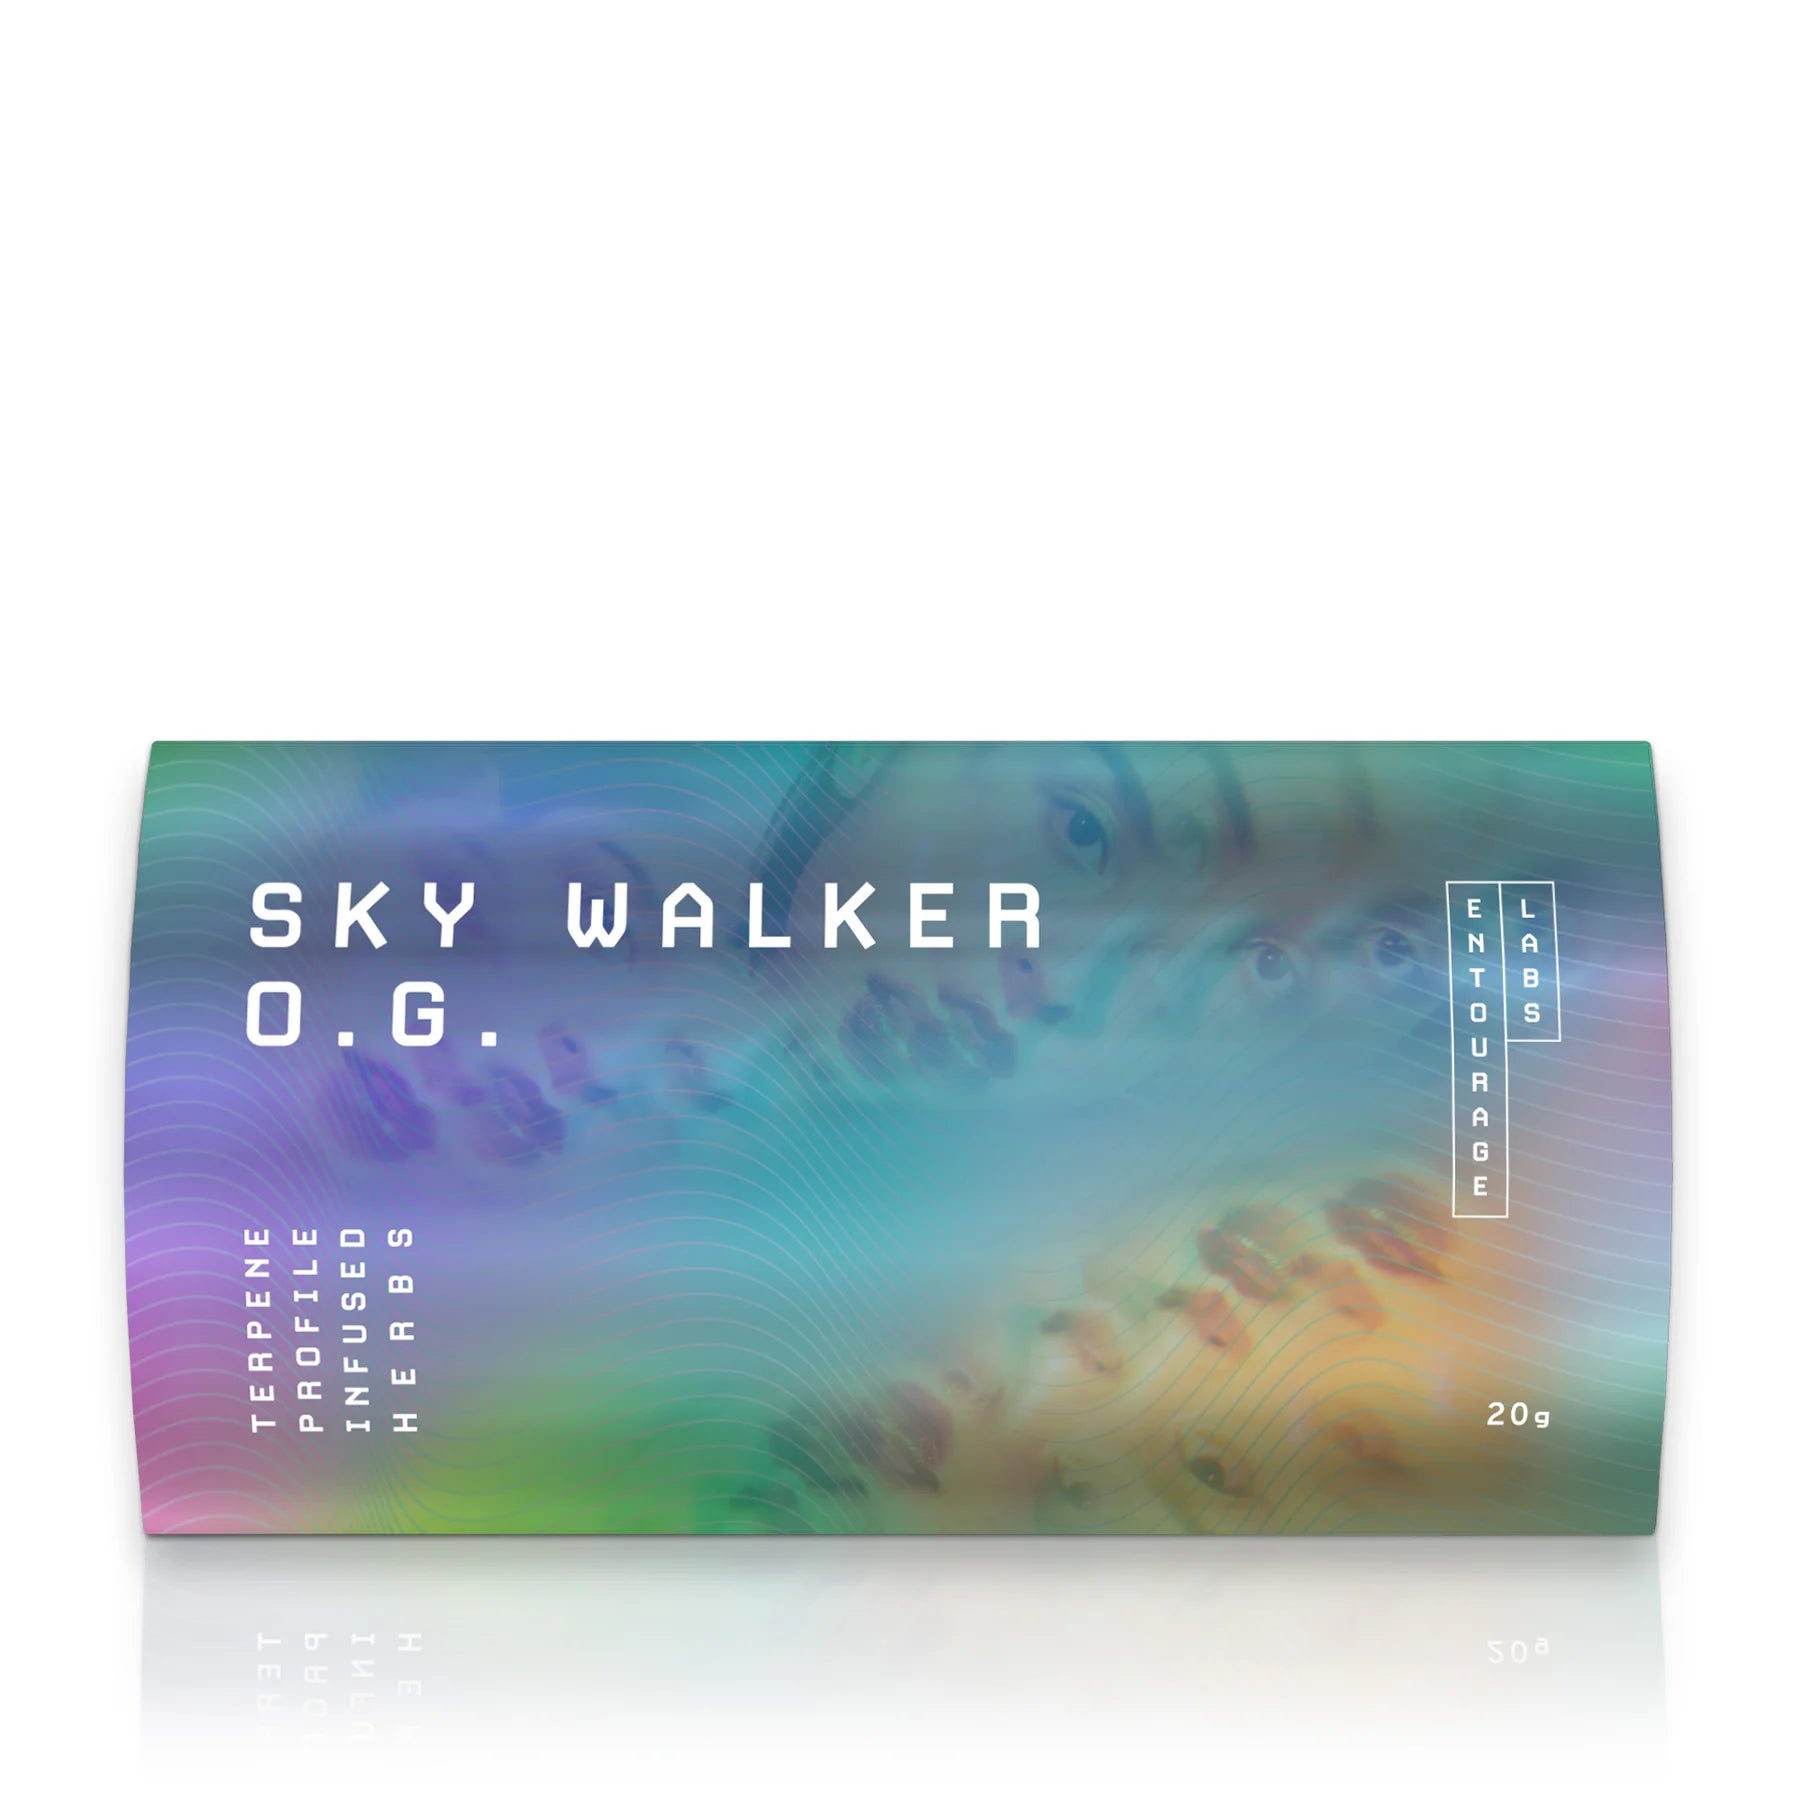 Buy Skywalker OG Terpene Infused Herb Pouch - Wick and Wire Co Melbourne Vape Shop, Victoria Australia